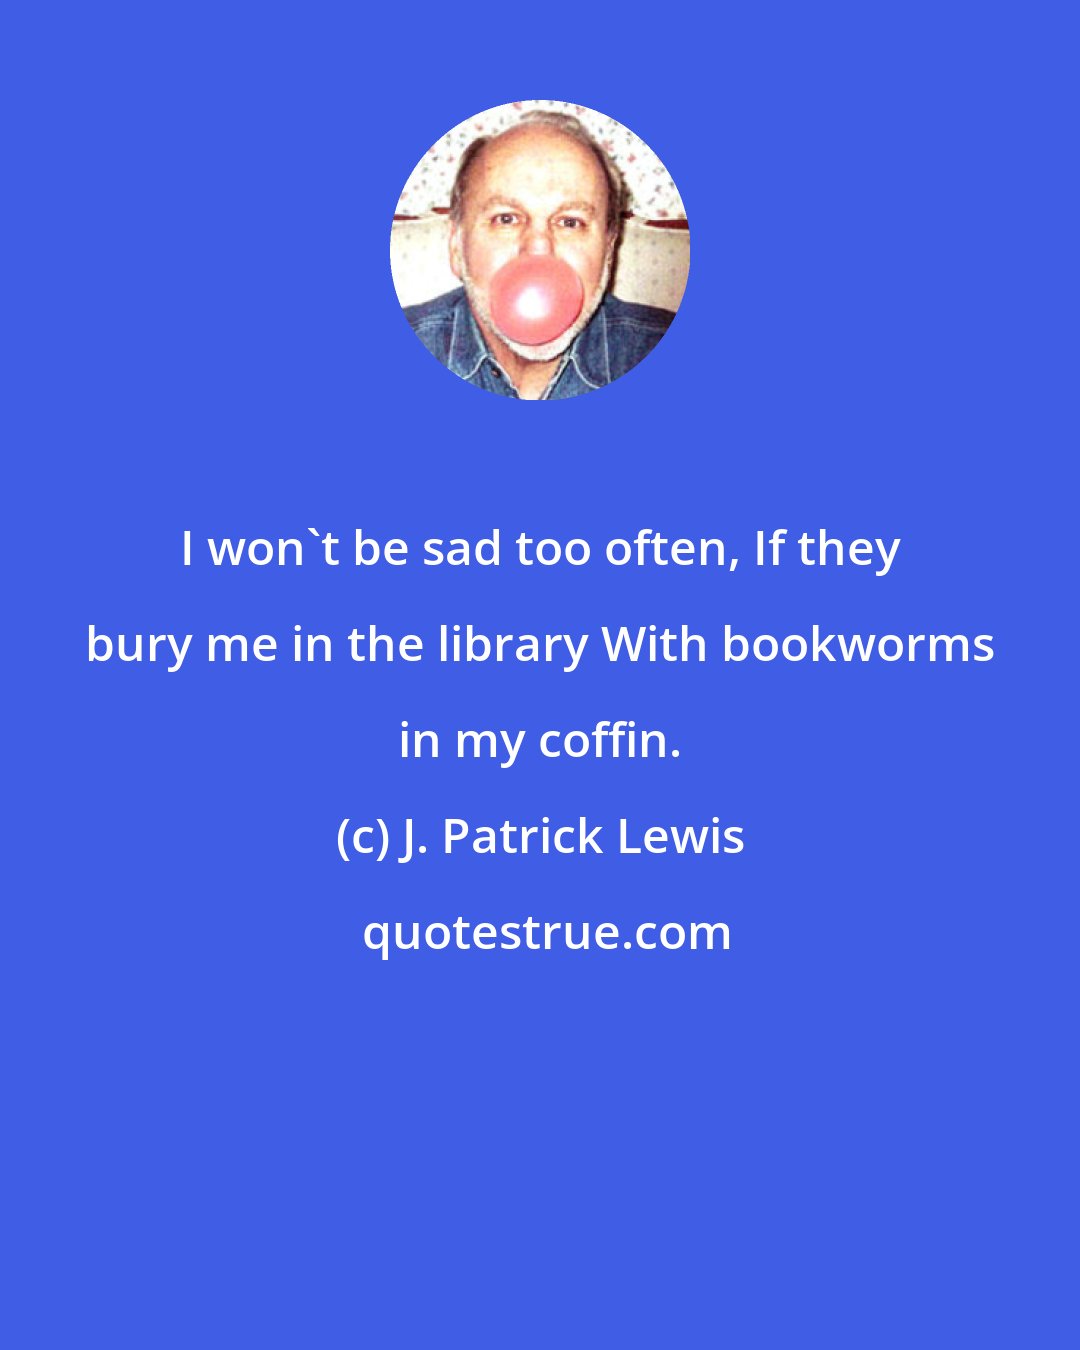 J. Patrick Lewis: I won't be sad too often, If they bury me in the library With bookworms in my coffin.